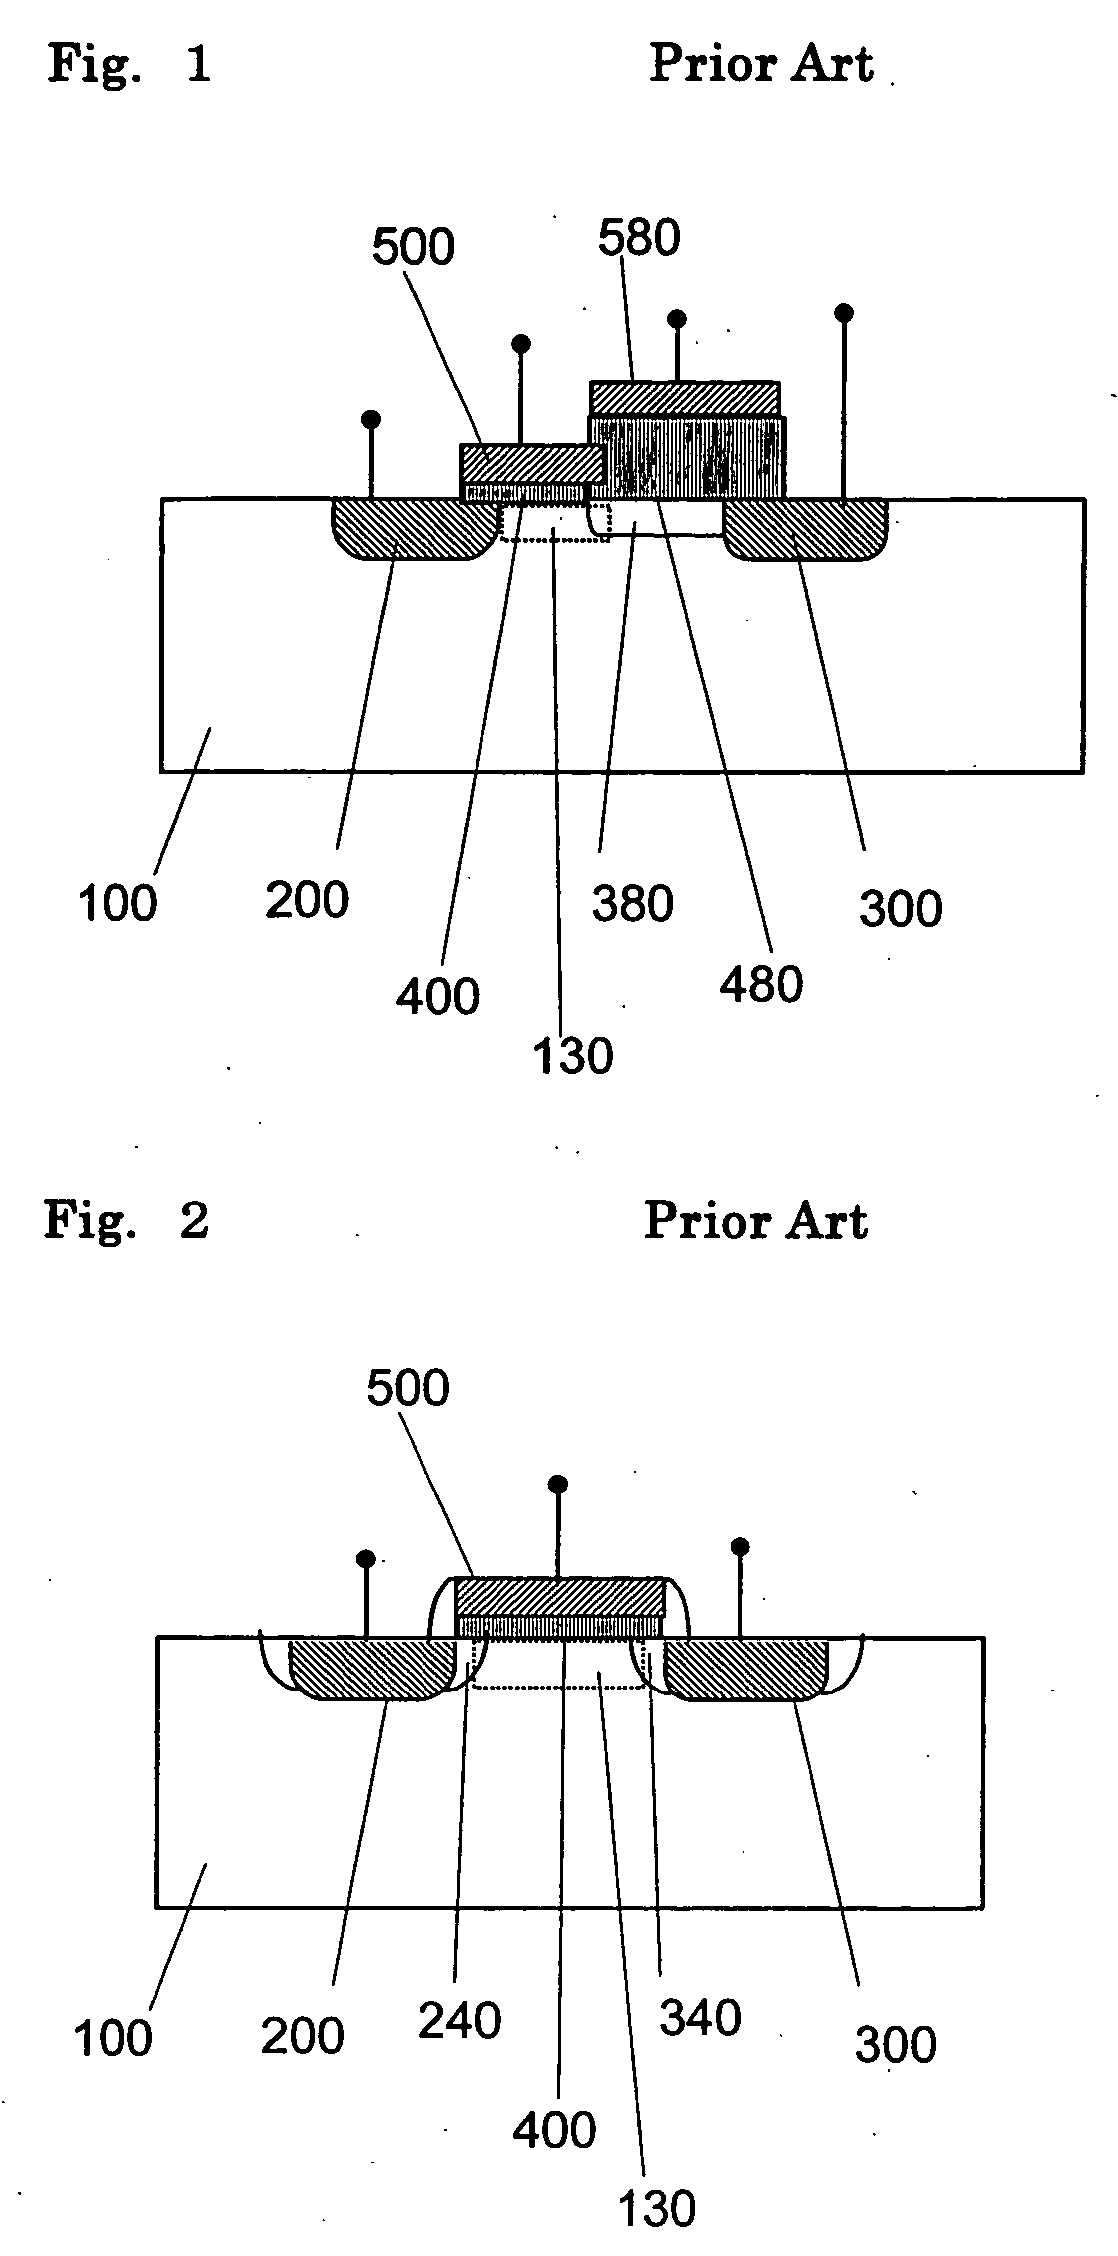 High voltage operating field effect transistor, bias circuit therefor and high voltage circuit thereof